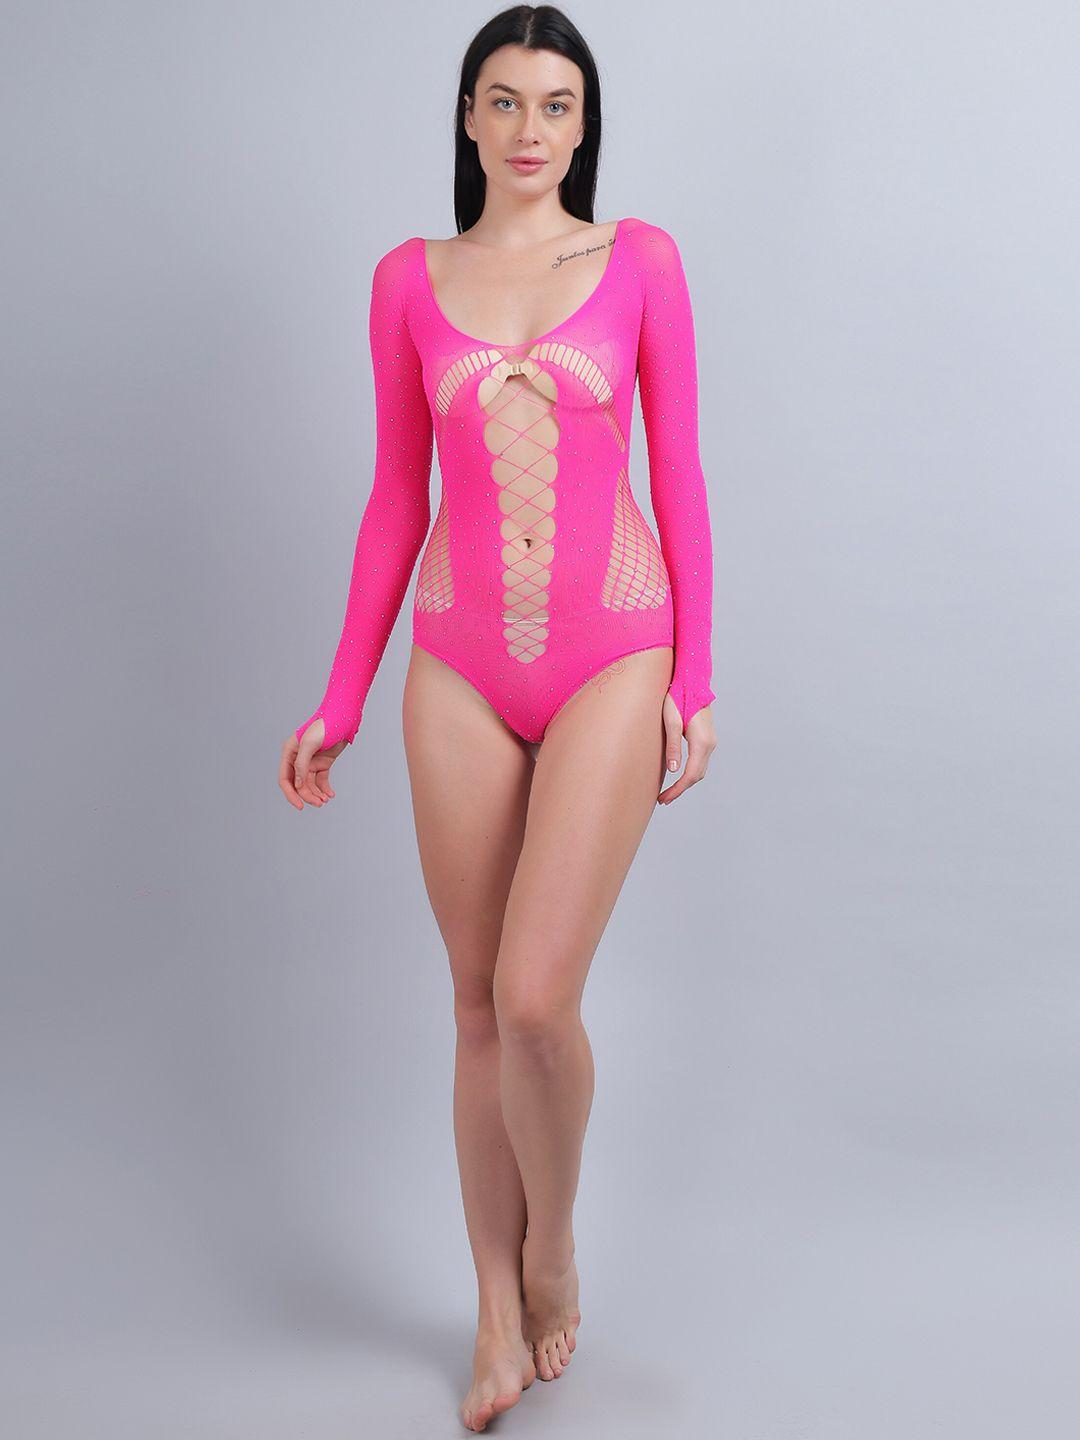 color style embellished stretchable baby doll